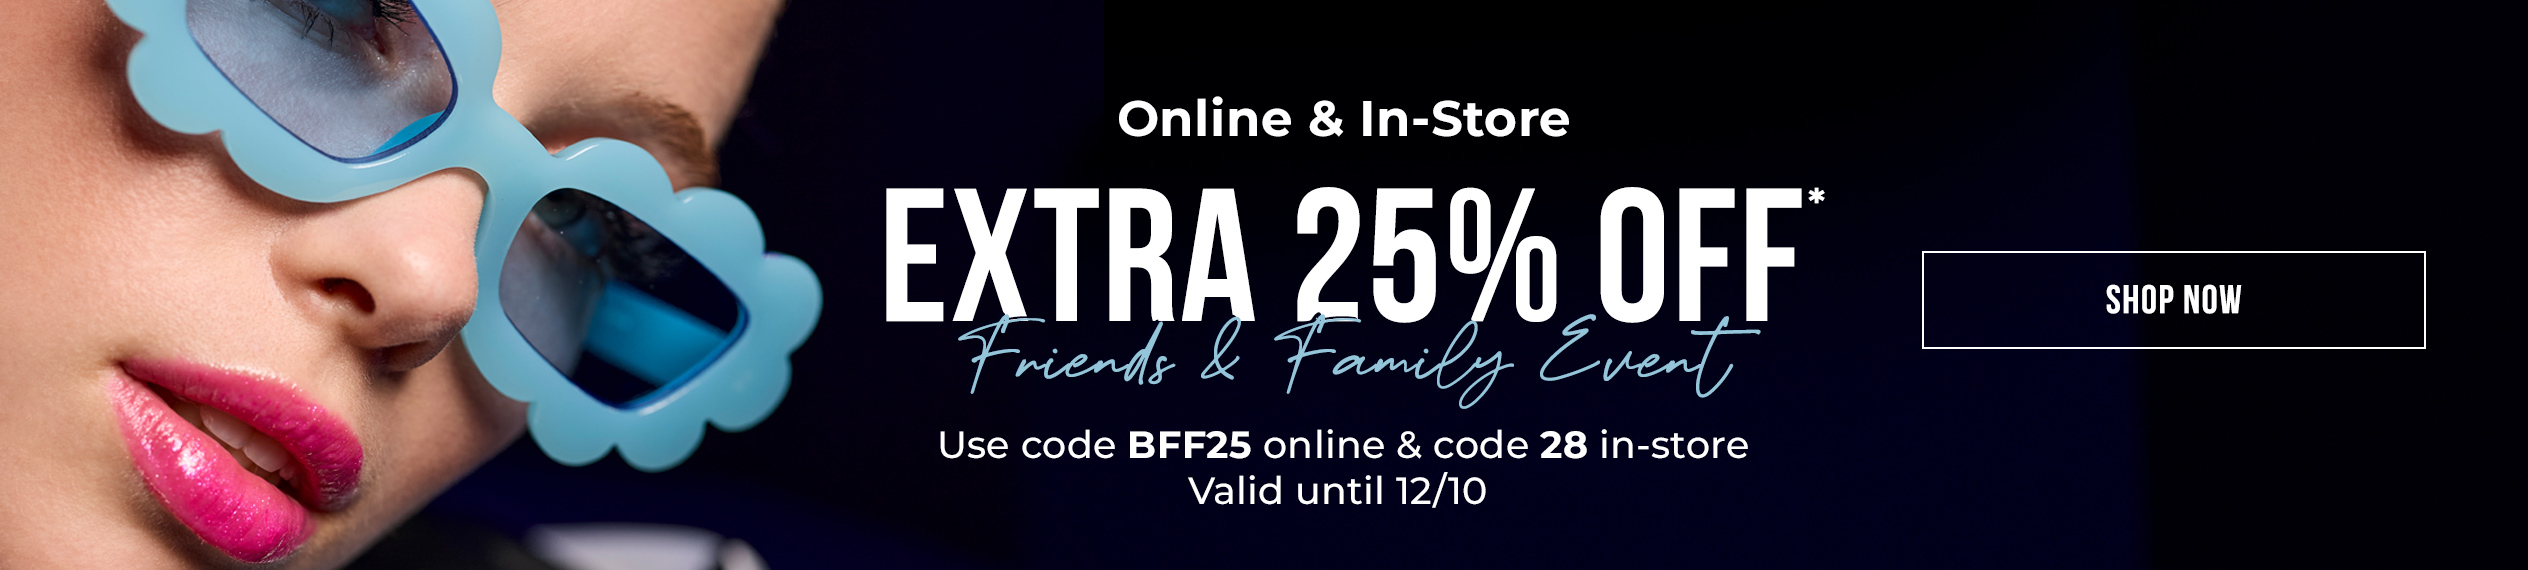 Hey BFF! EXTRA 25% OFF* Friends & Family Event With Code BFF25 *12/4-12/10 online & in-store